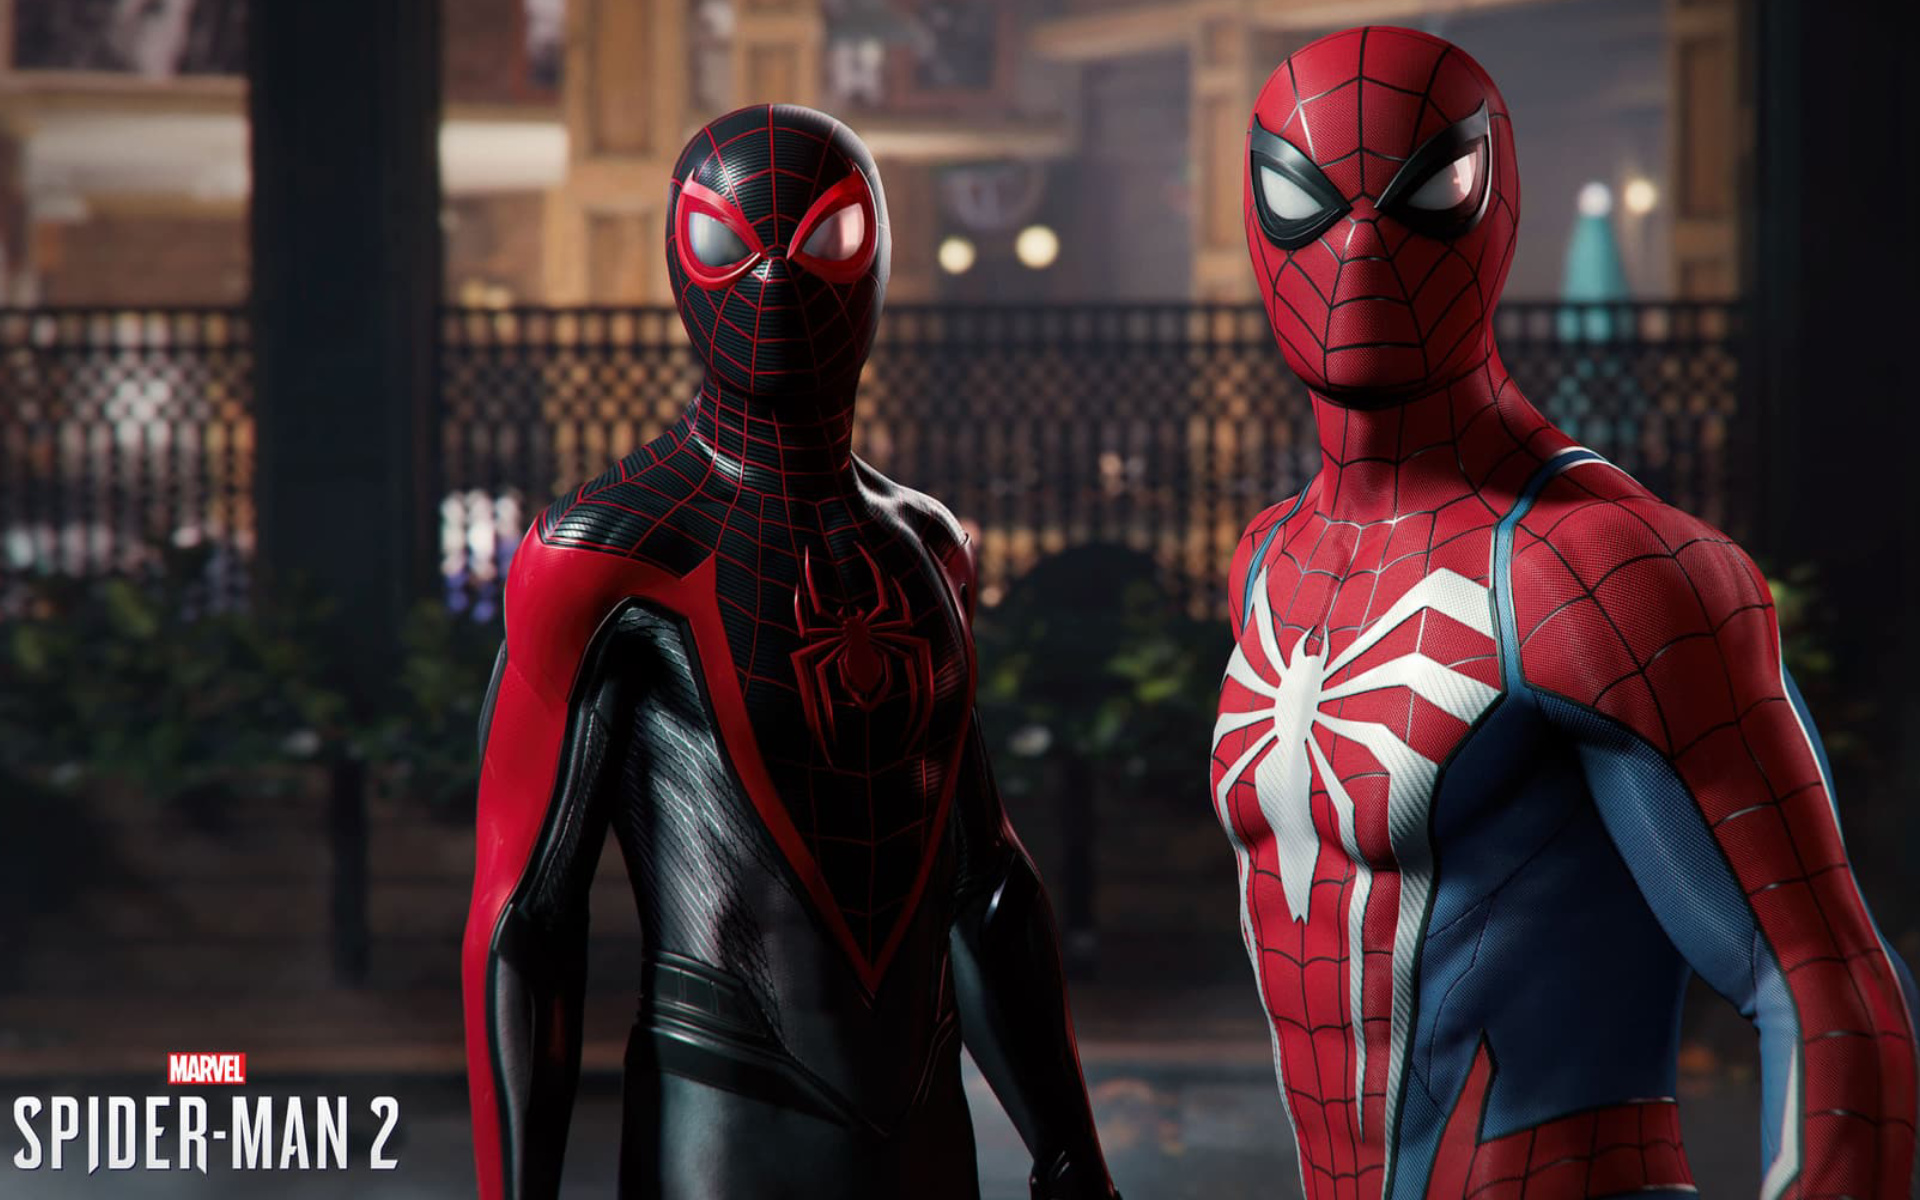 Spider-Man 2 is reportedly releasing by Spring 2023, according to some leaks